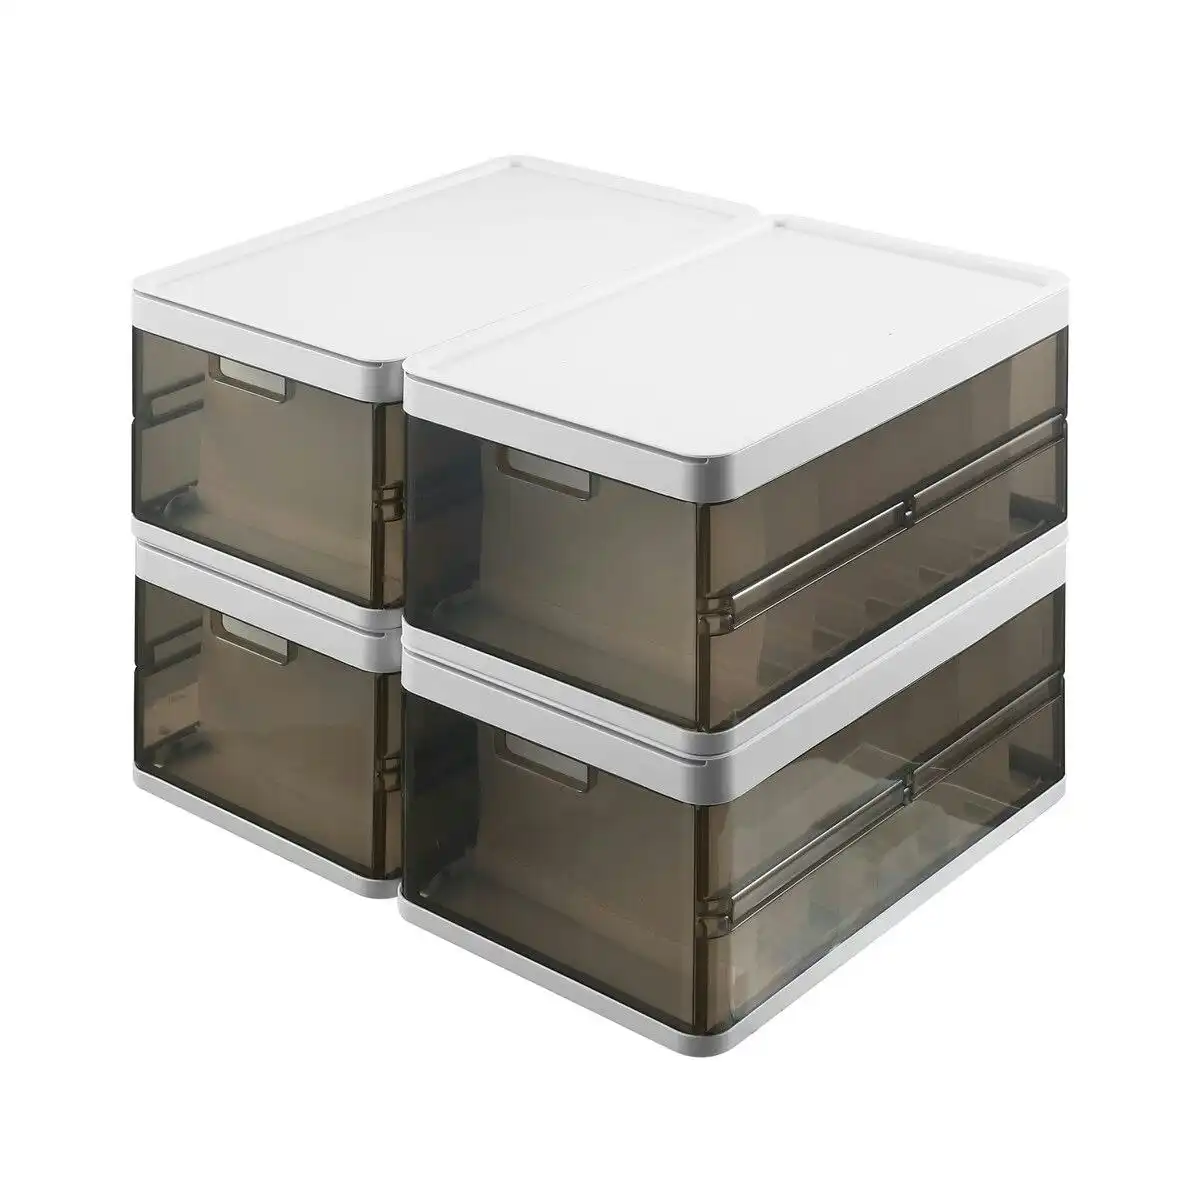 Ausway 4pcs Storage Boxes Bins Plastic Stackable Clear Shoe Containers Wardrobe for Handbag Clothes Foldable Organiser with Lids Partitions